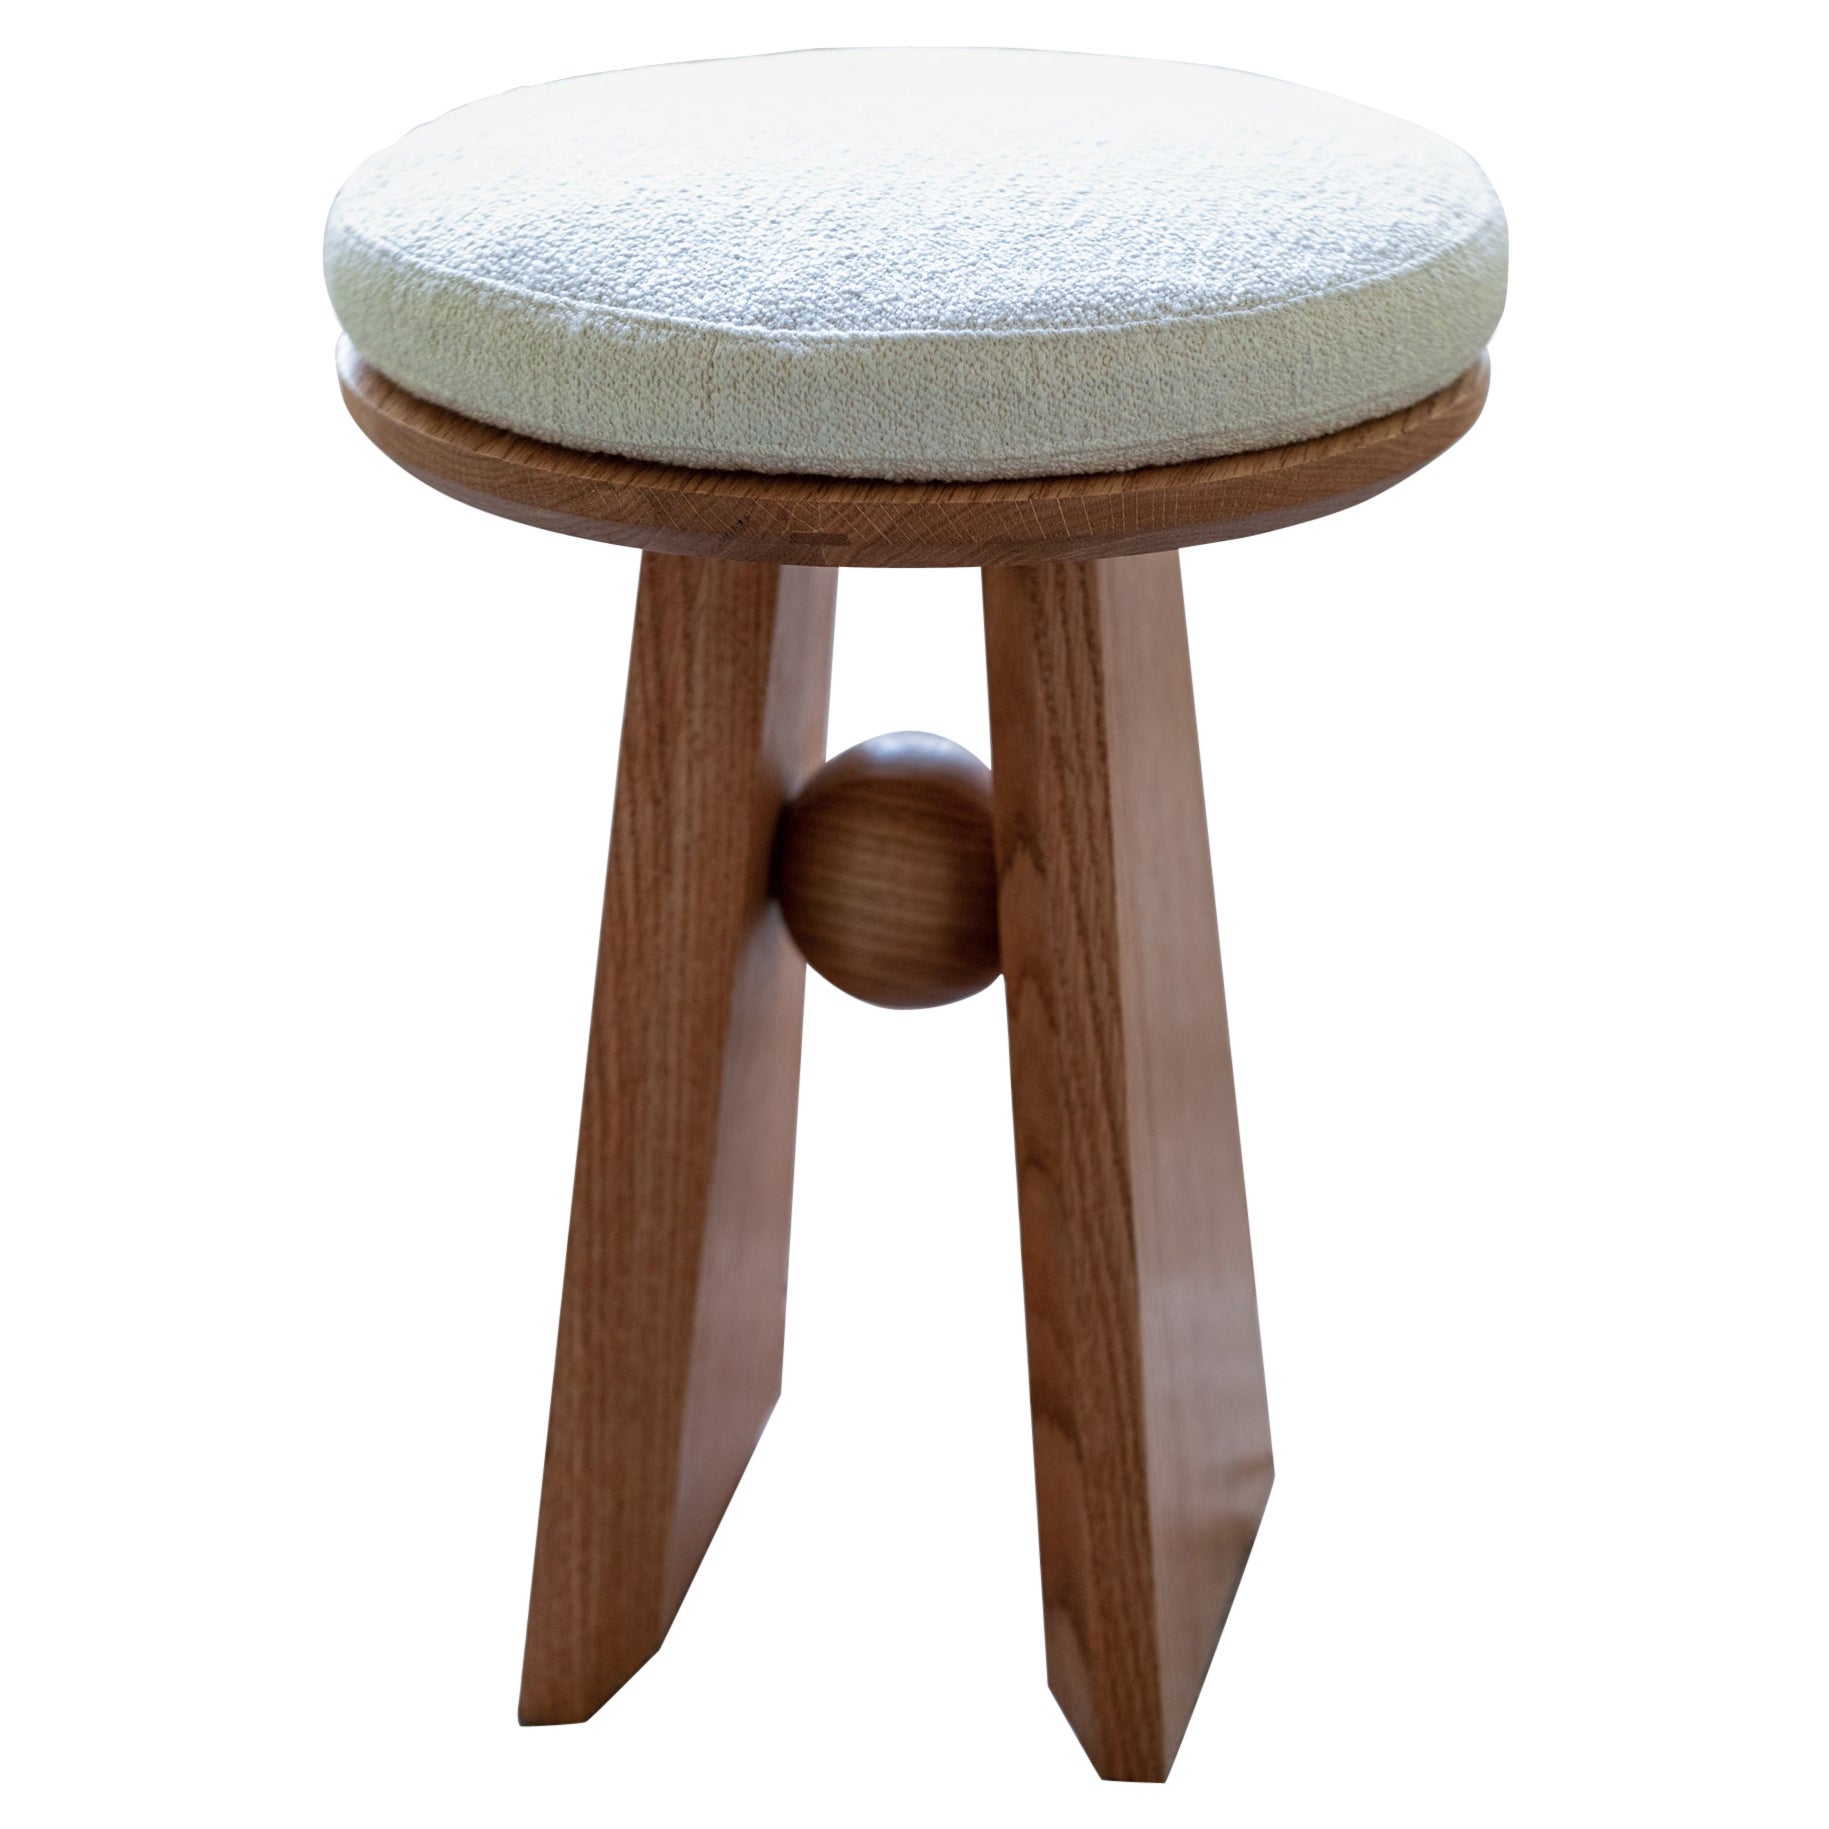 For Sale: White (Boucle - Twiggy White : American Oak) Basurto 01 Contemporary Wooden and Fabric Stool